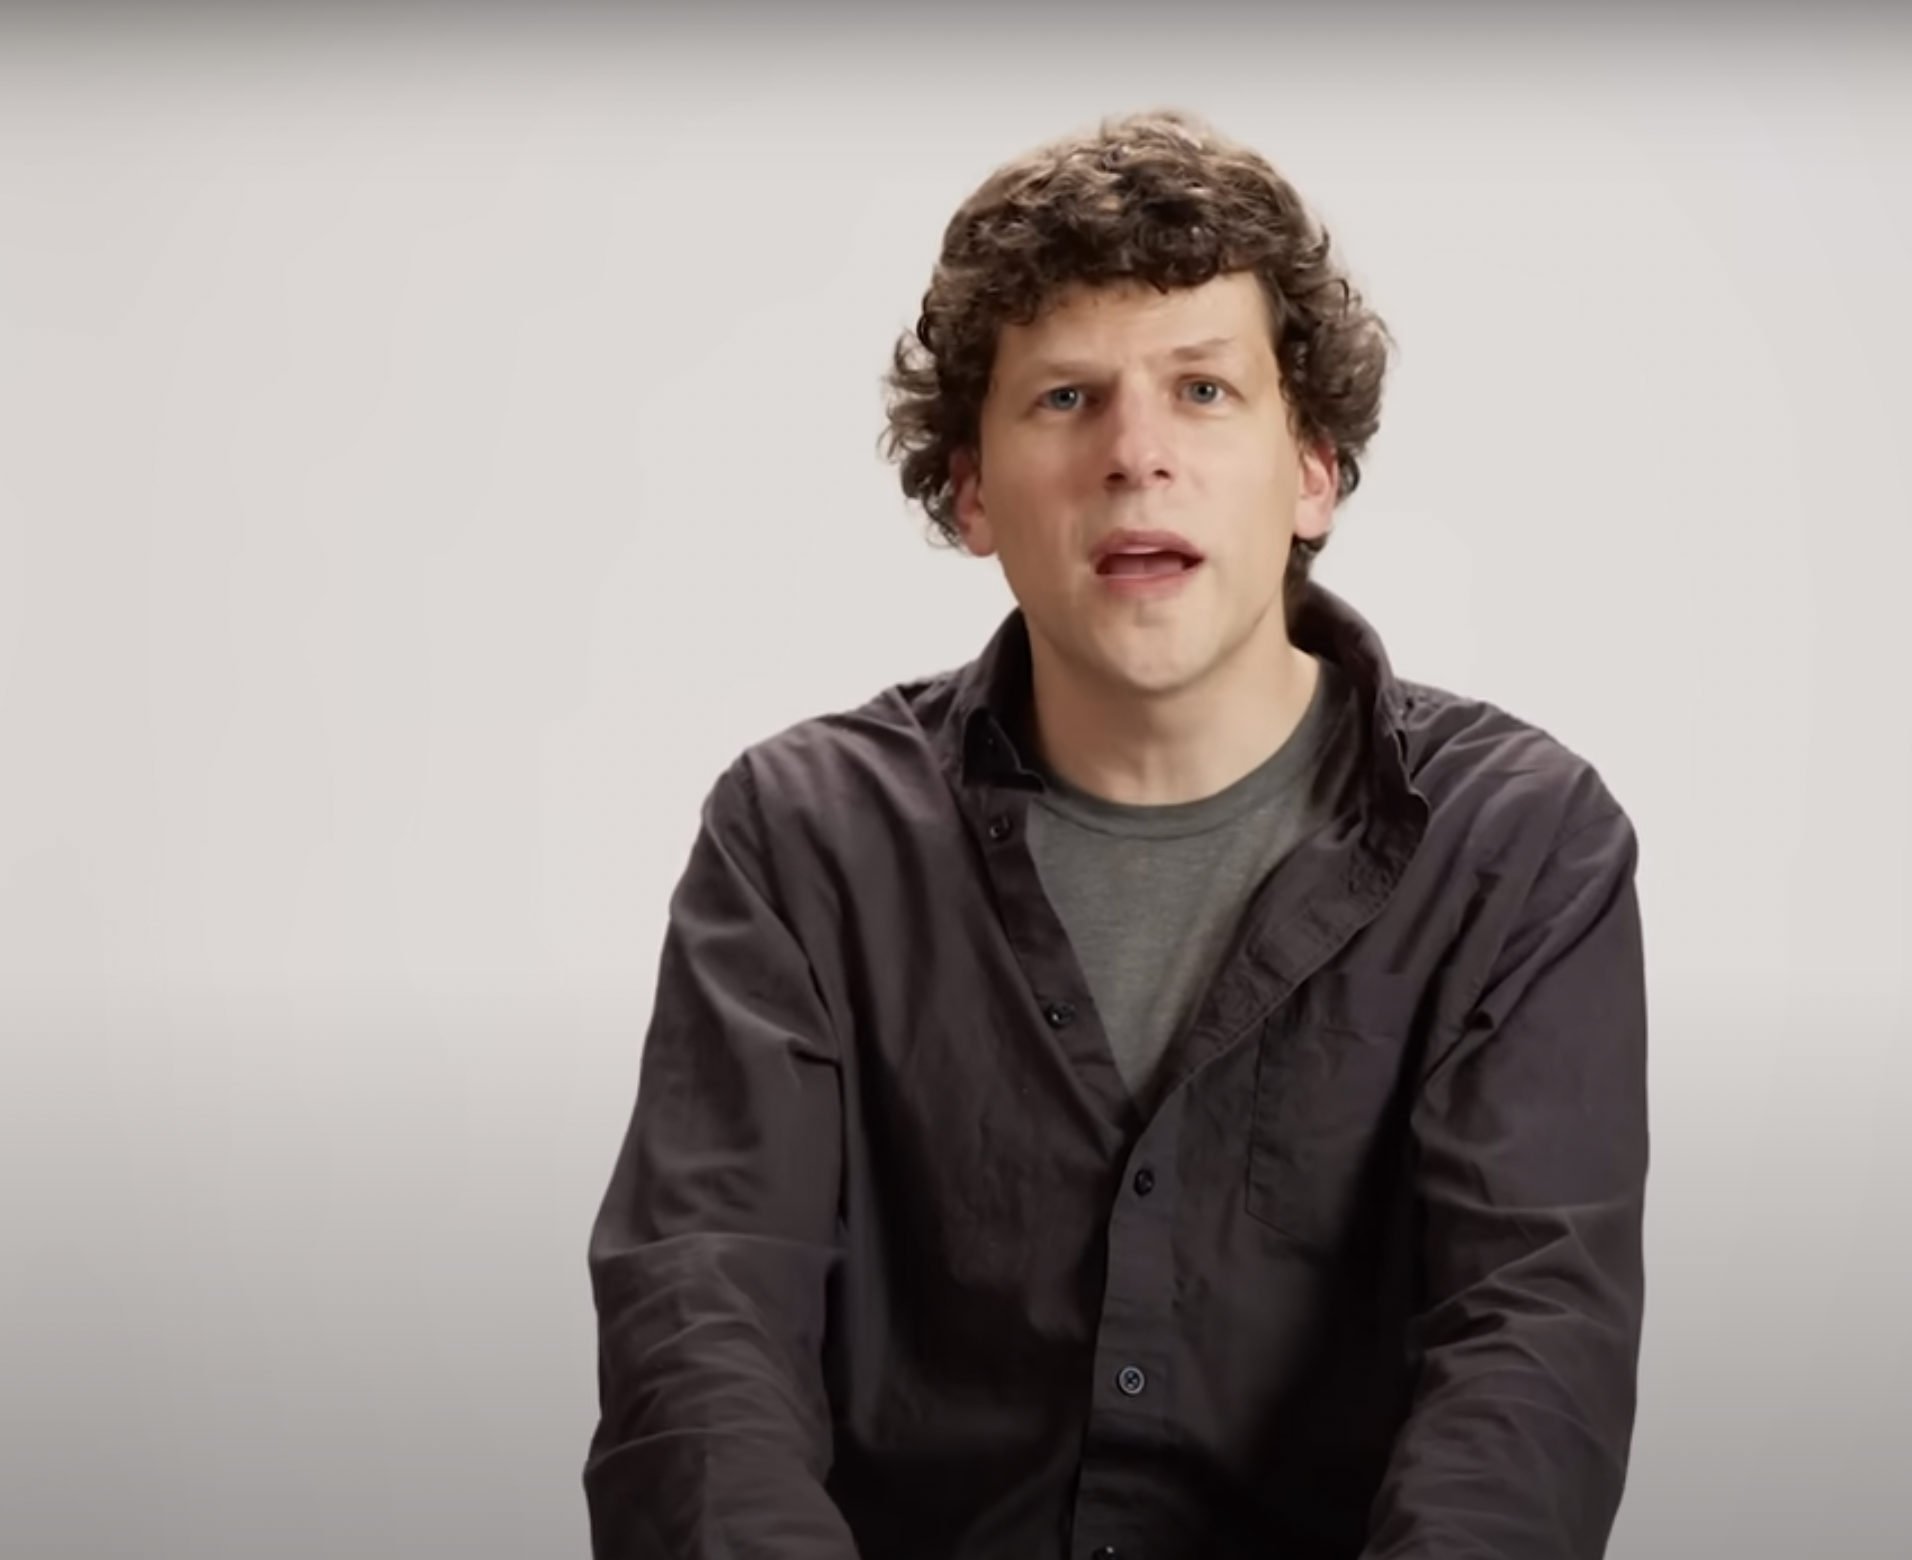 Jesse Eisenberg Opens Up Why He Doesn’t Appear In Many Movies Anymore